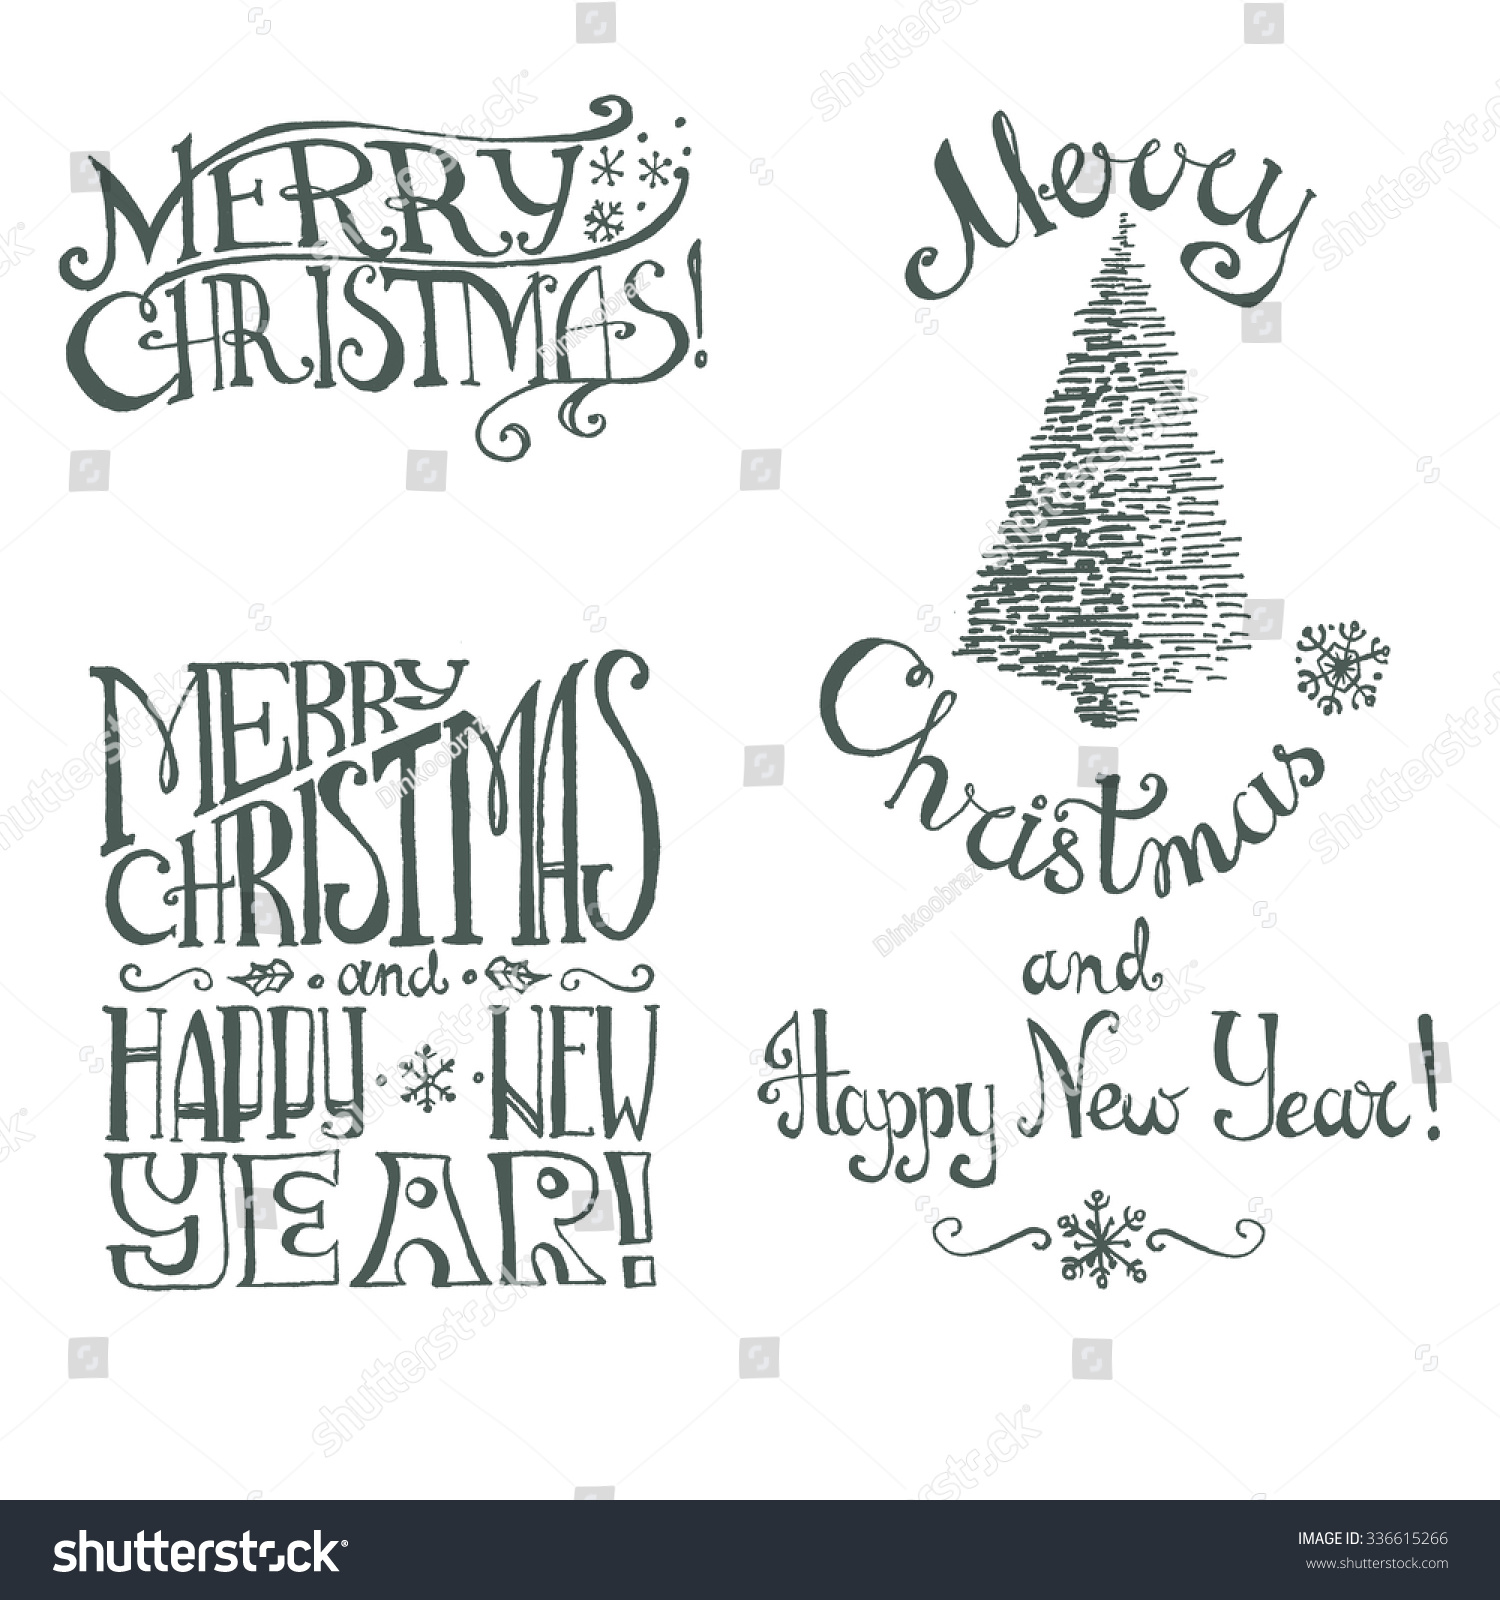 Christmas Anad New Year Hand Drawn Stock Vector (Royalty Free ...